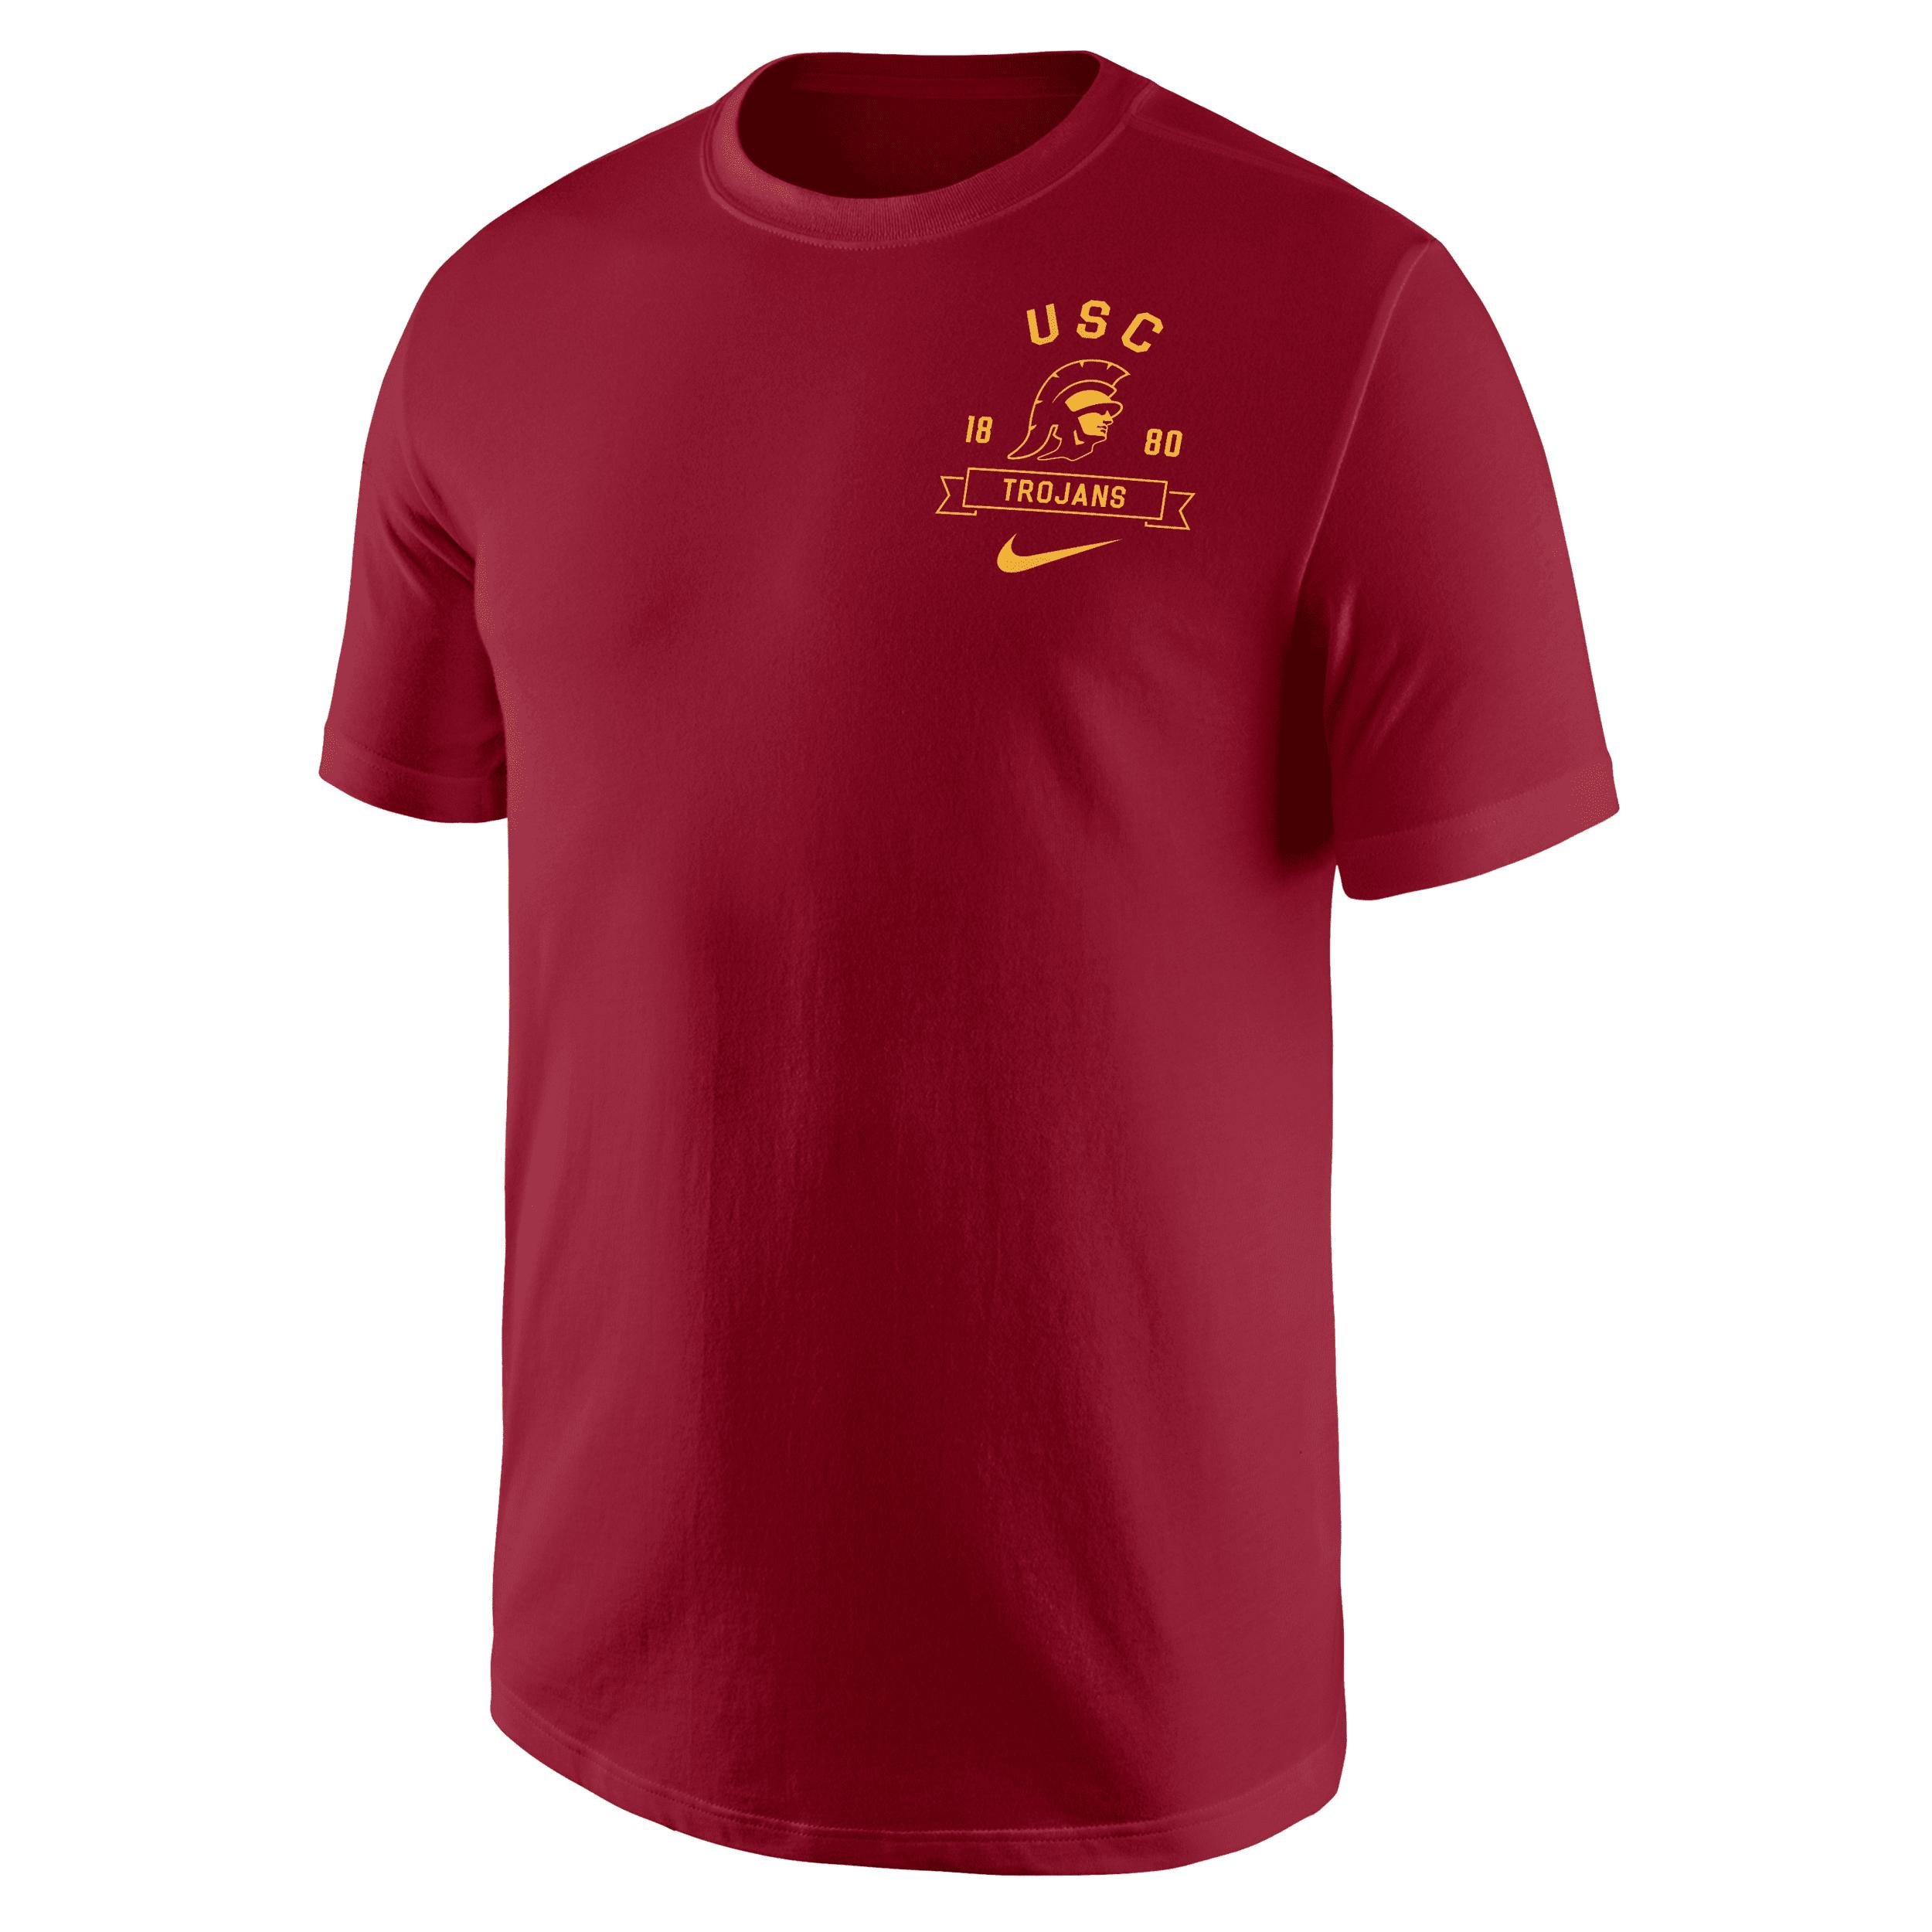 USC Nike Men's College Max90 T-Shirt by NIKE